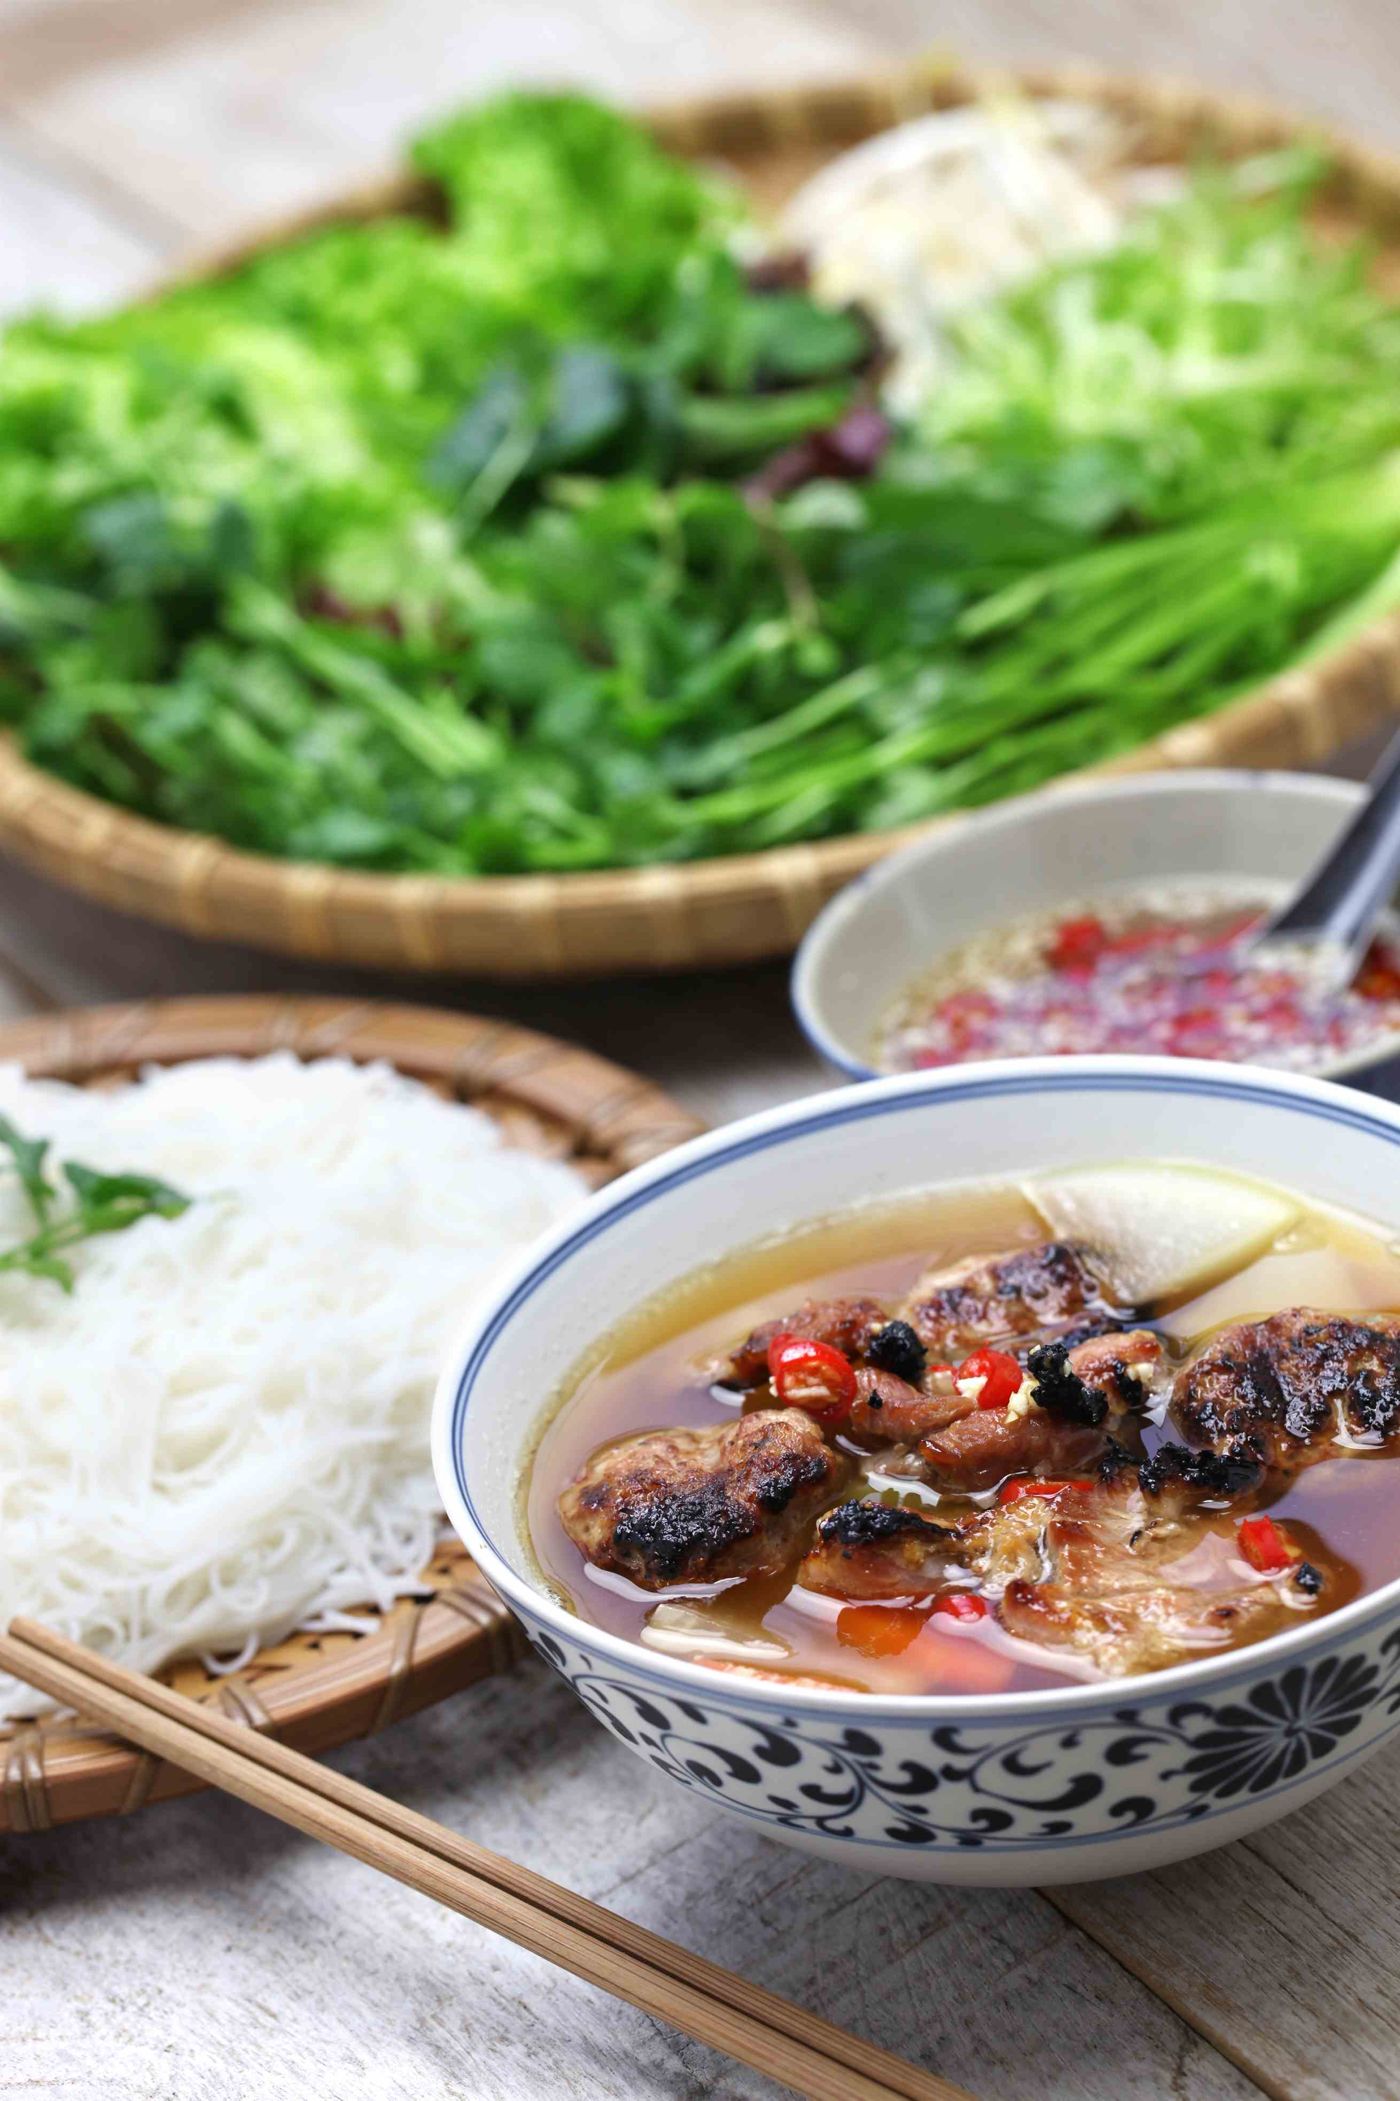 The significant foods in Northern Vietnam